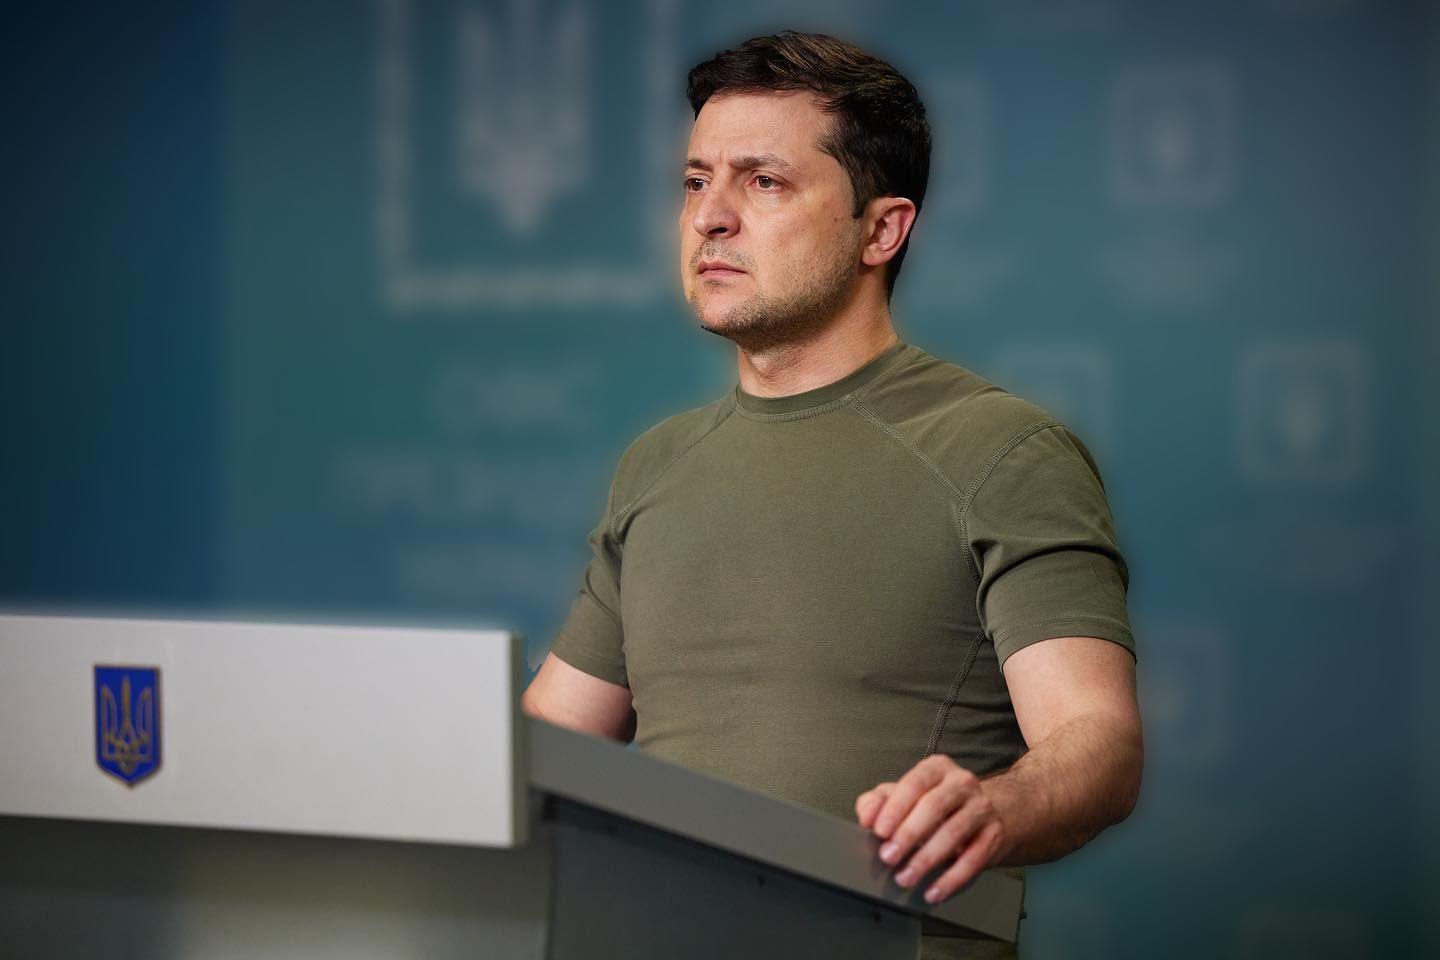 <p>Volodymyr Zelensky, president of Ukraine, has impressed the world with his courage and conviction to stand up to Vladimir Putin’s invasion of his country. Here’s a look at the life of the man whom many consider to be a modern-day hero.</p><p><a href="https://www.instagram.com/p/CbiSL0zAKdO/">See photo on Instagram</a></p>